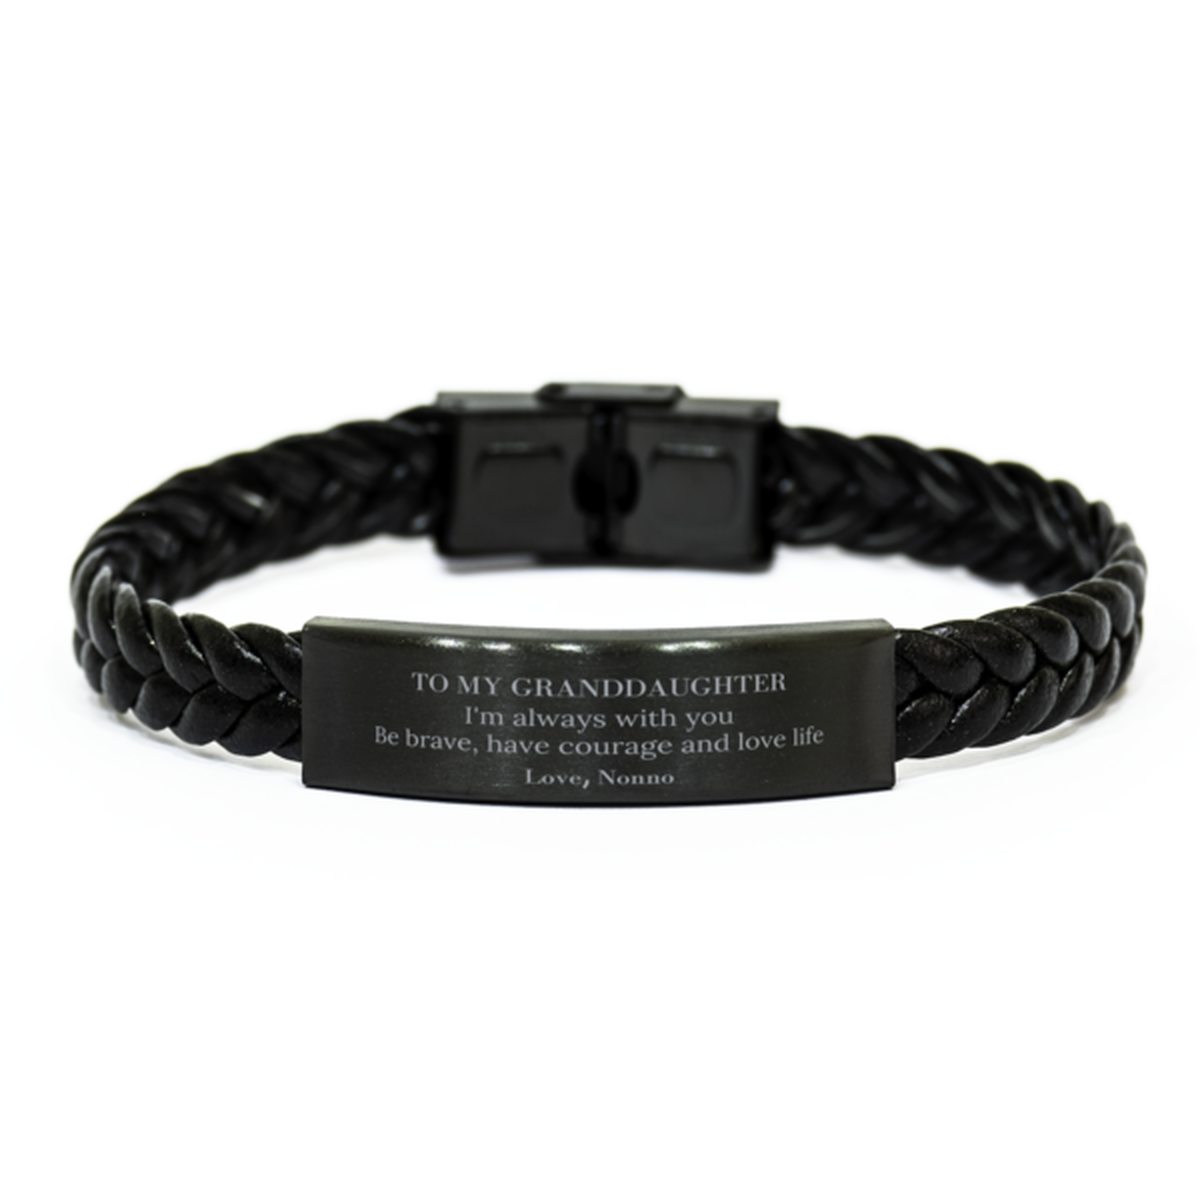 To My Granddaughter Gifts from Nonno, Unique Braided Leather Bracelet Inspirational Christmas Birthday Graduation Gifts for Granddaughter I'm always with you. Be brave, have courage and love life. Love, Nonno